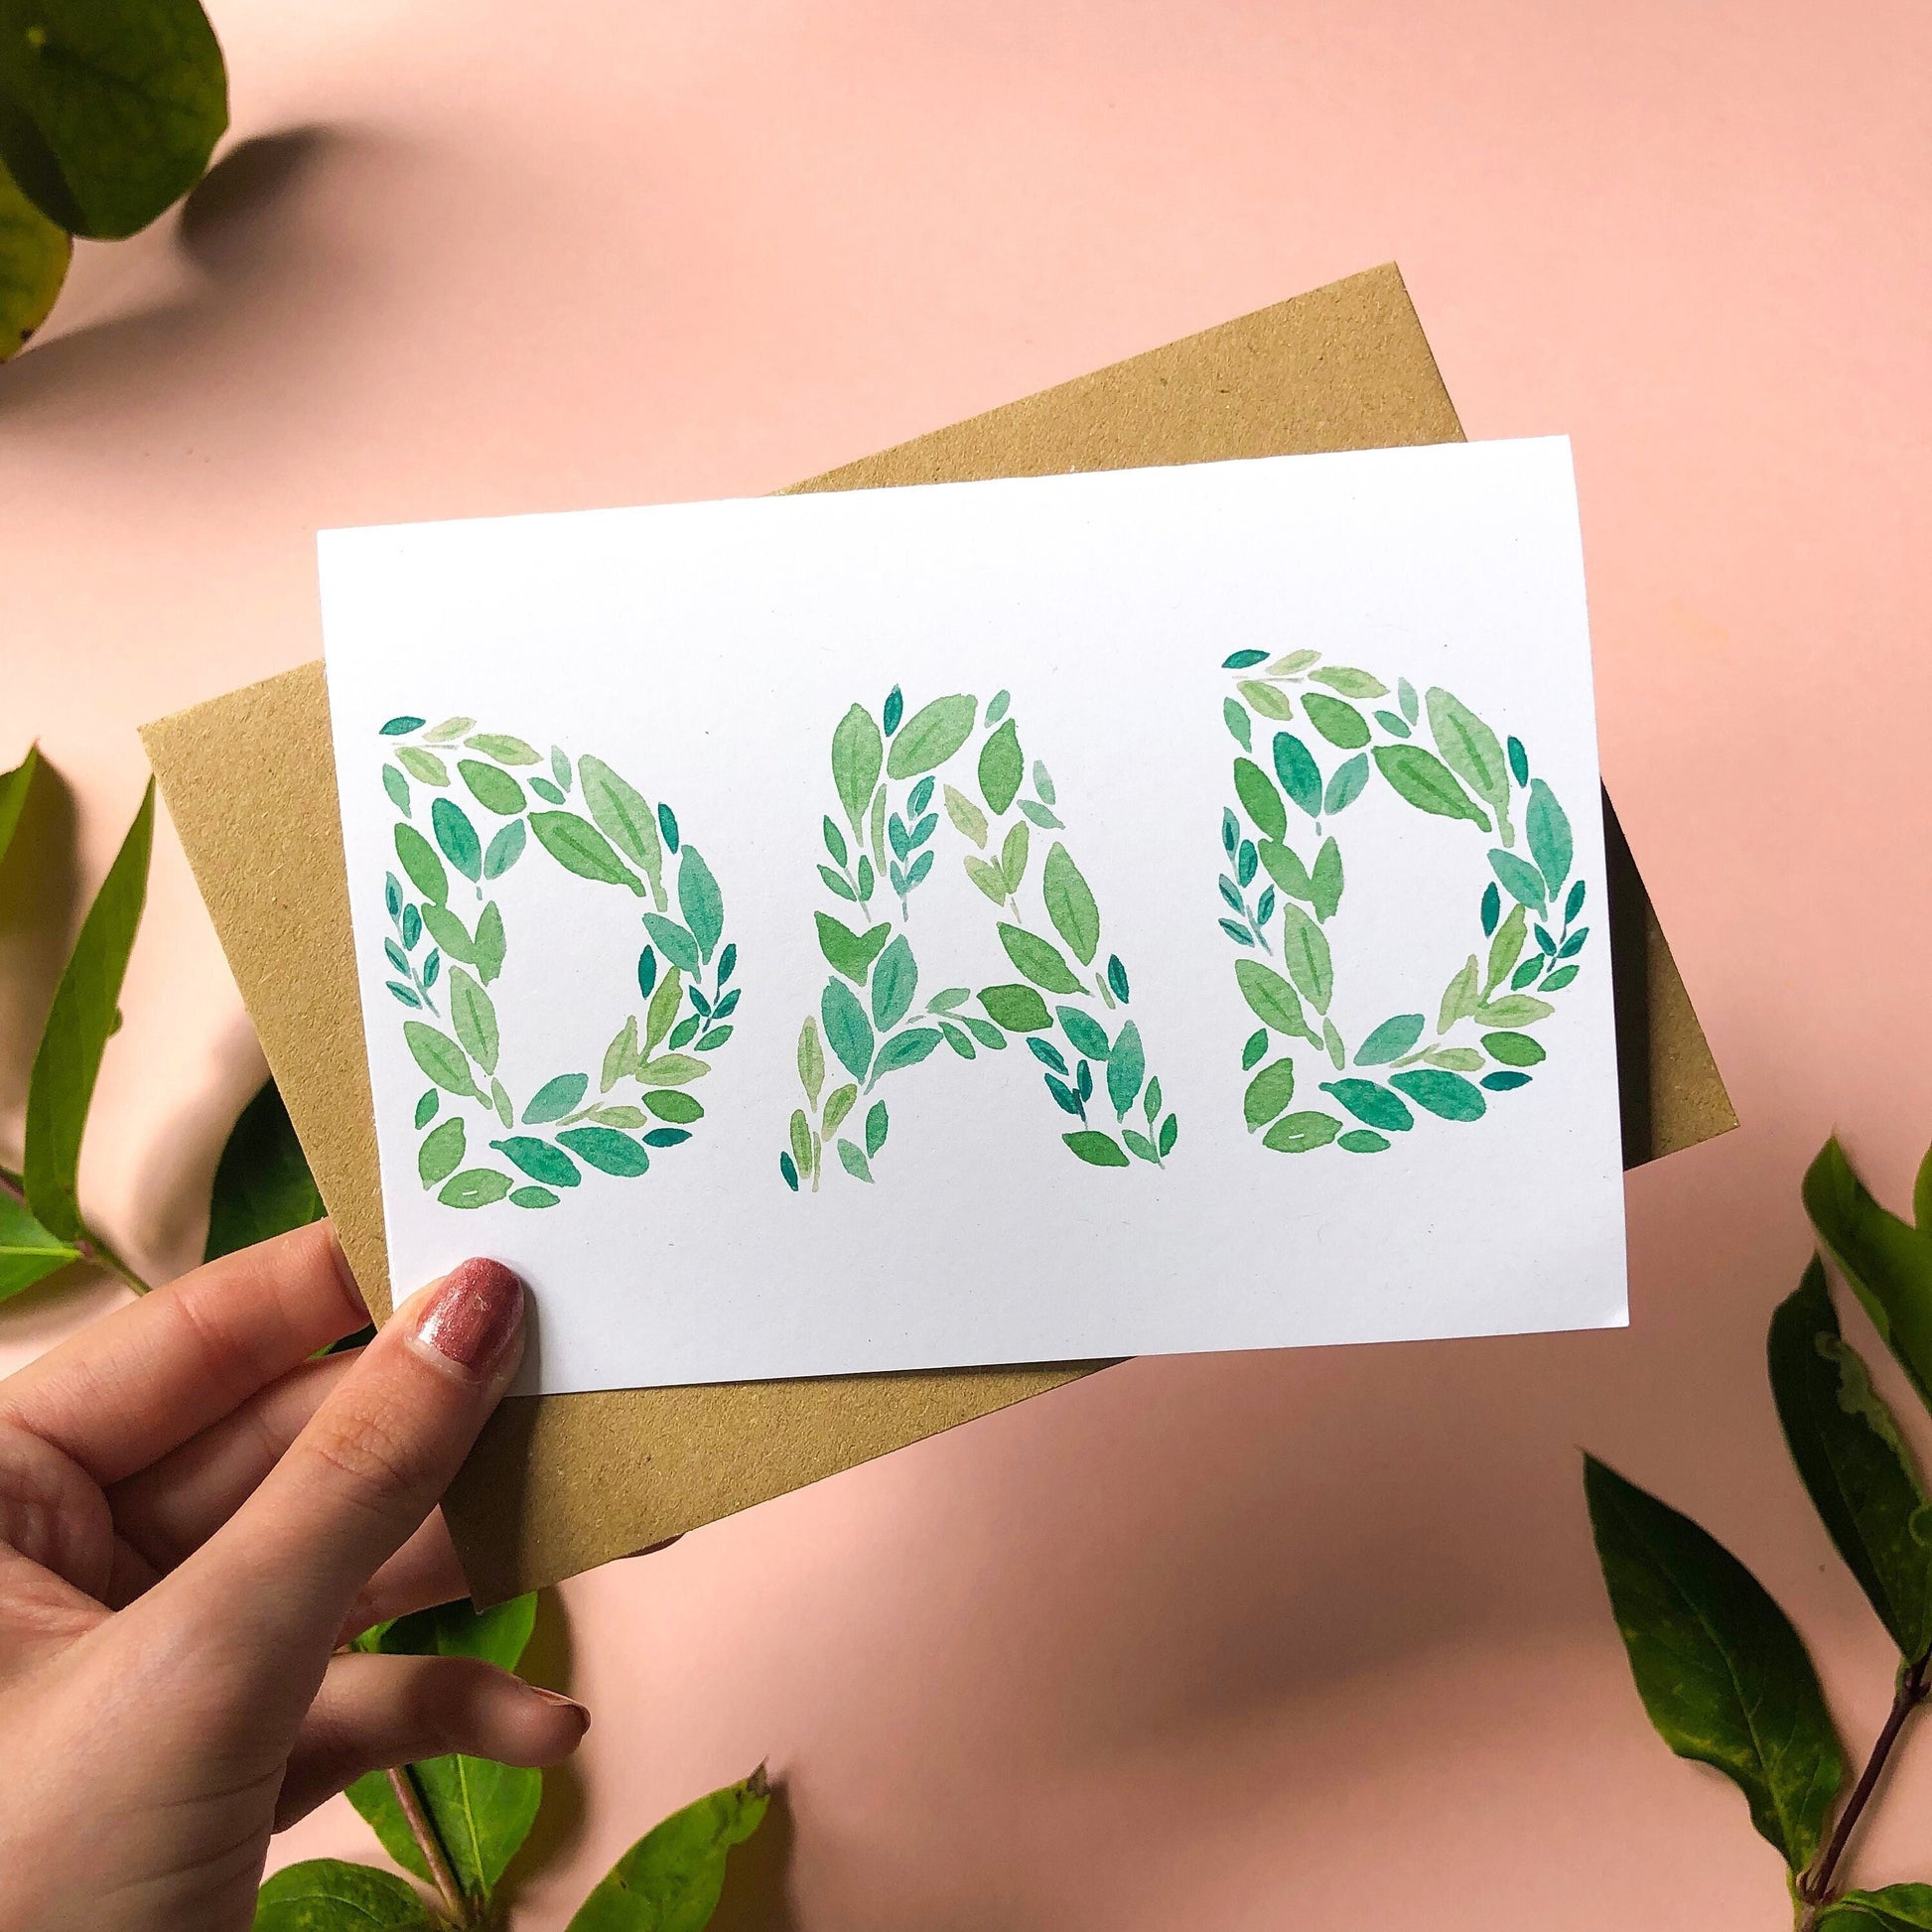 A Father's Day card with the word "DAD" spelled out beautifully in green leaves of various shades and shapes. The card offers a simple yet elegant way to show appreciation and affection for a beloved dad on his special day.